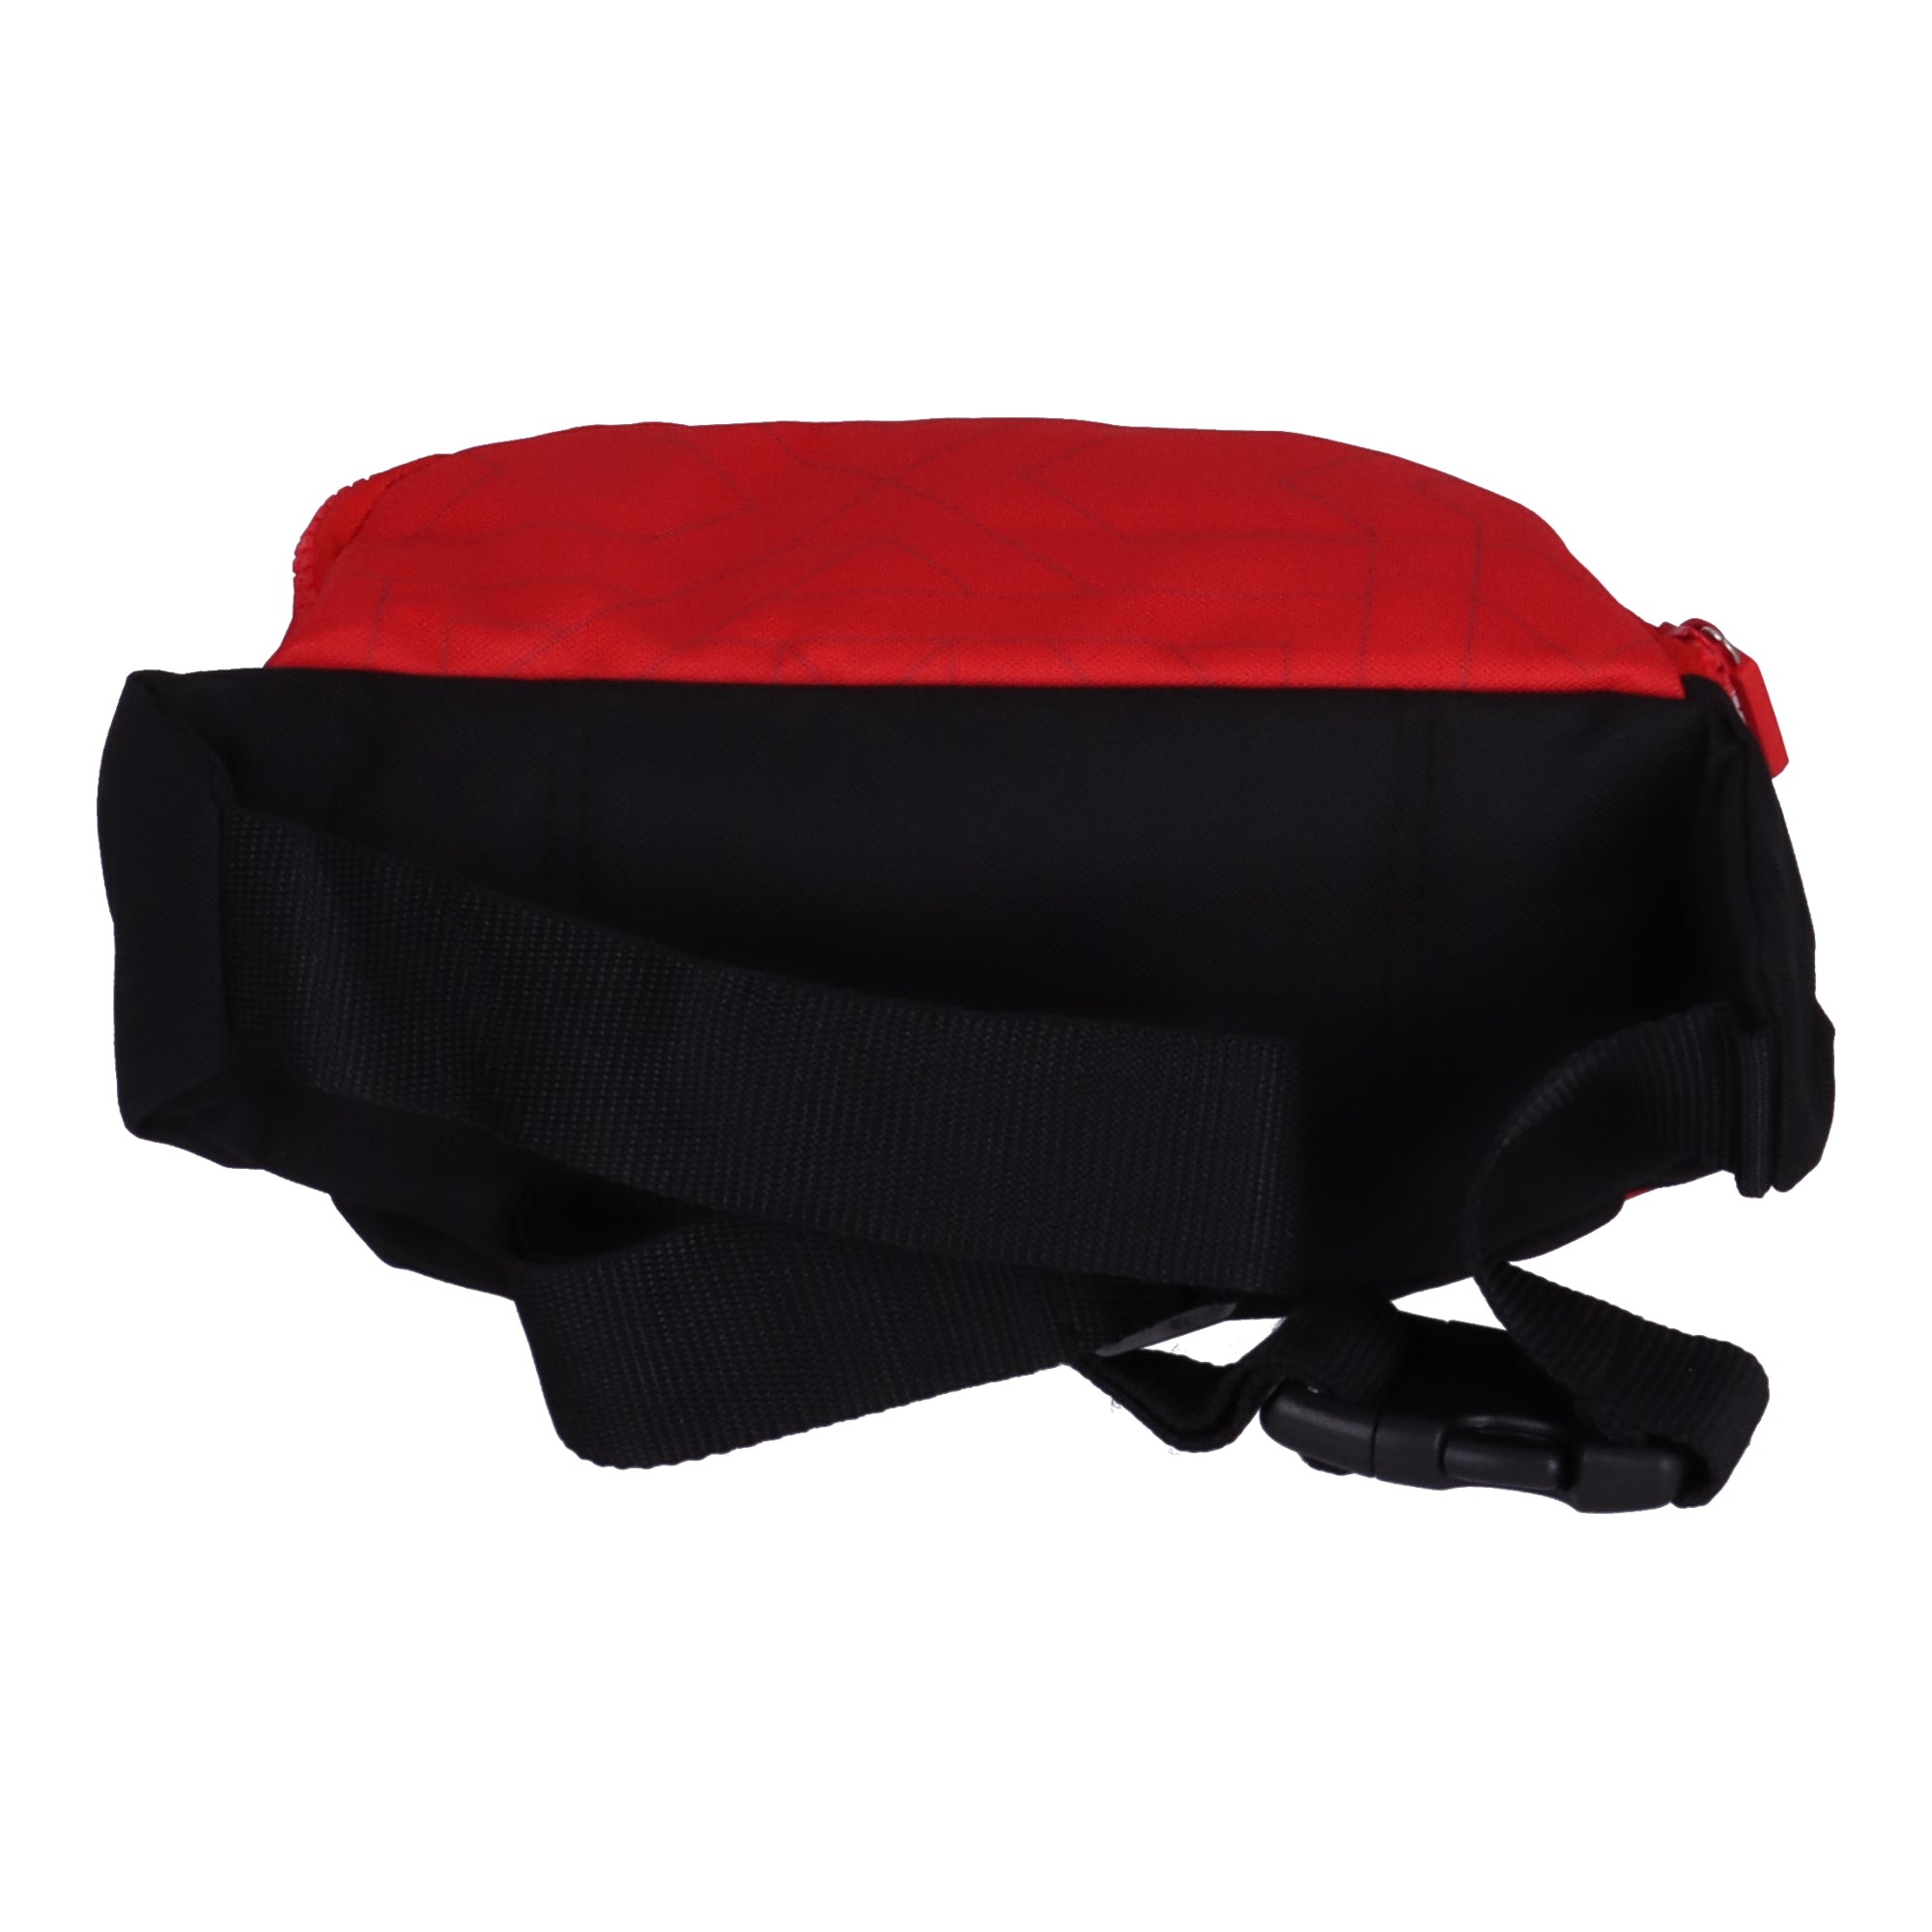 Red and black bum bag 23/24